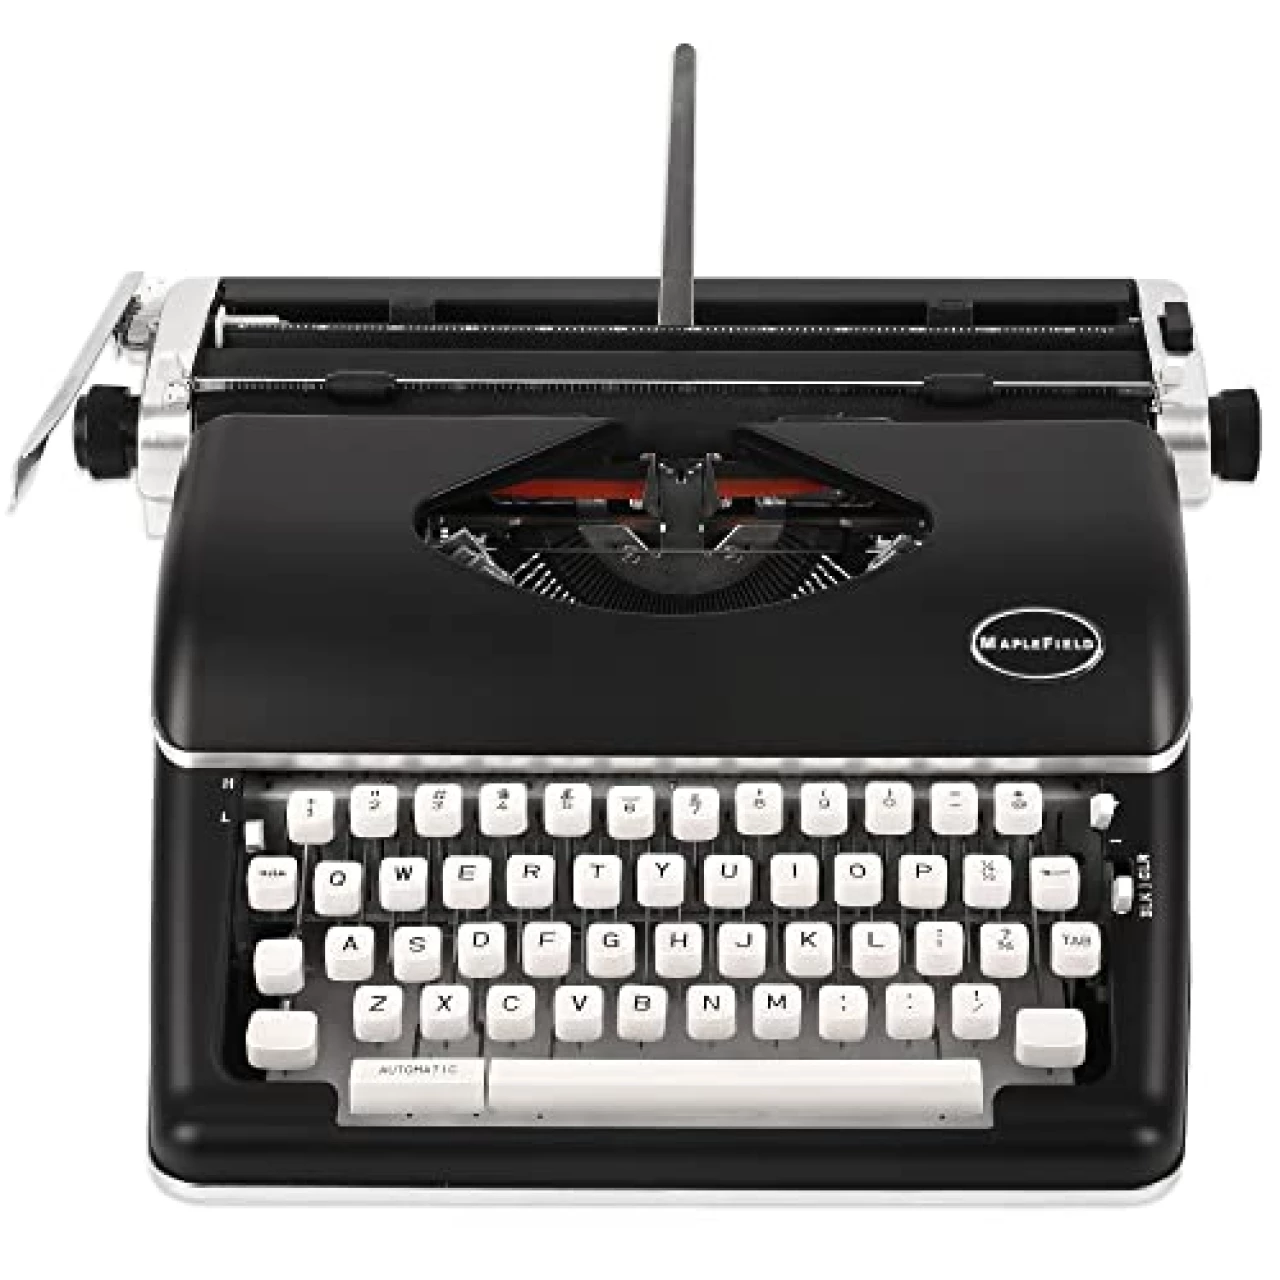 Maplefield Black Vintage Typewriter for a Nostalgic Flow - Manual Typewriter Portable Model for Remote Writing Locations - Sleek &amp; Durable Type Writer Classic Word Processor - Typewriters for Writers